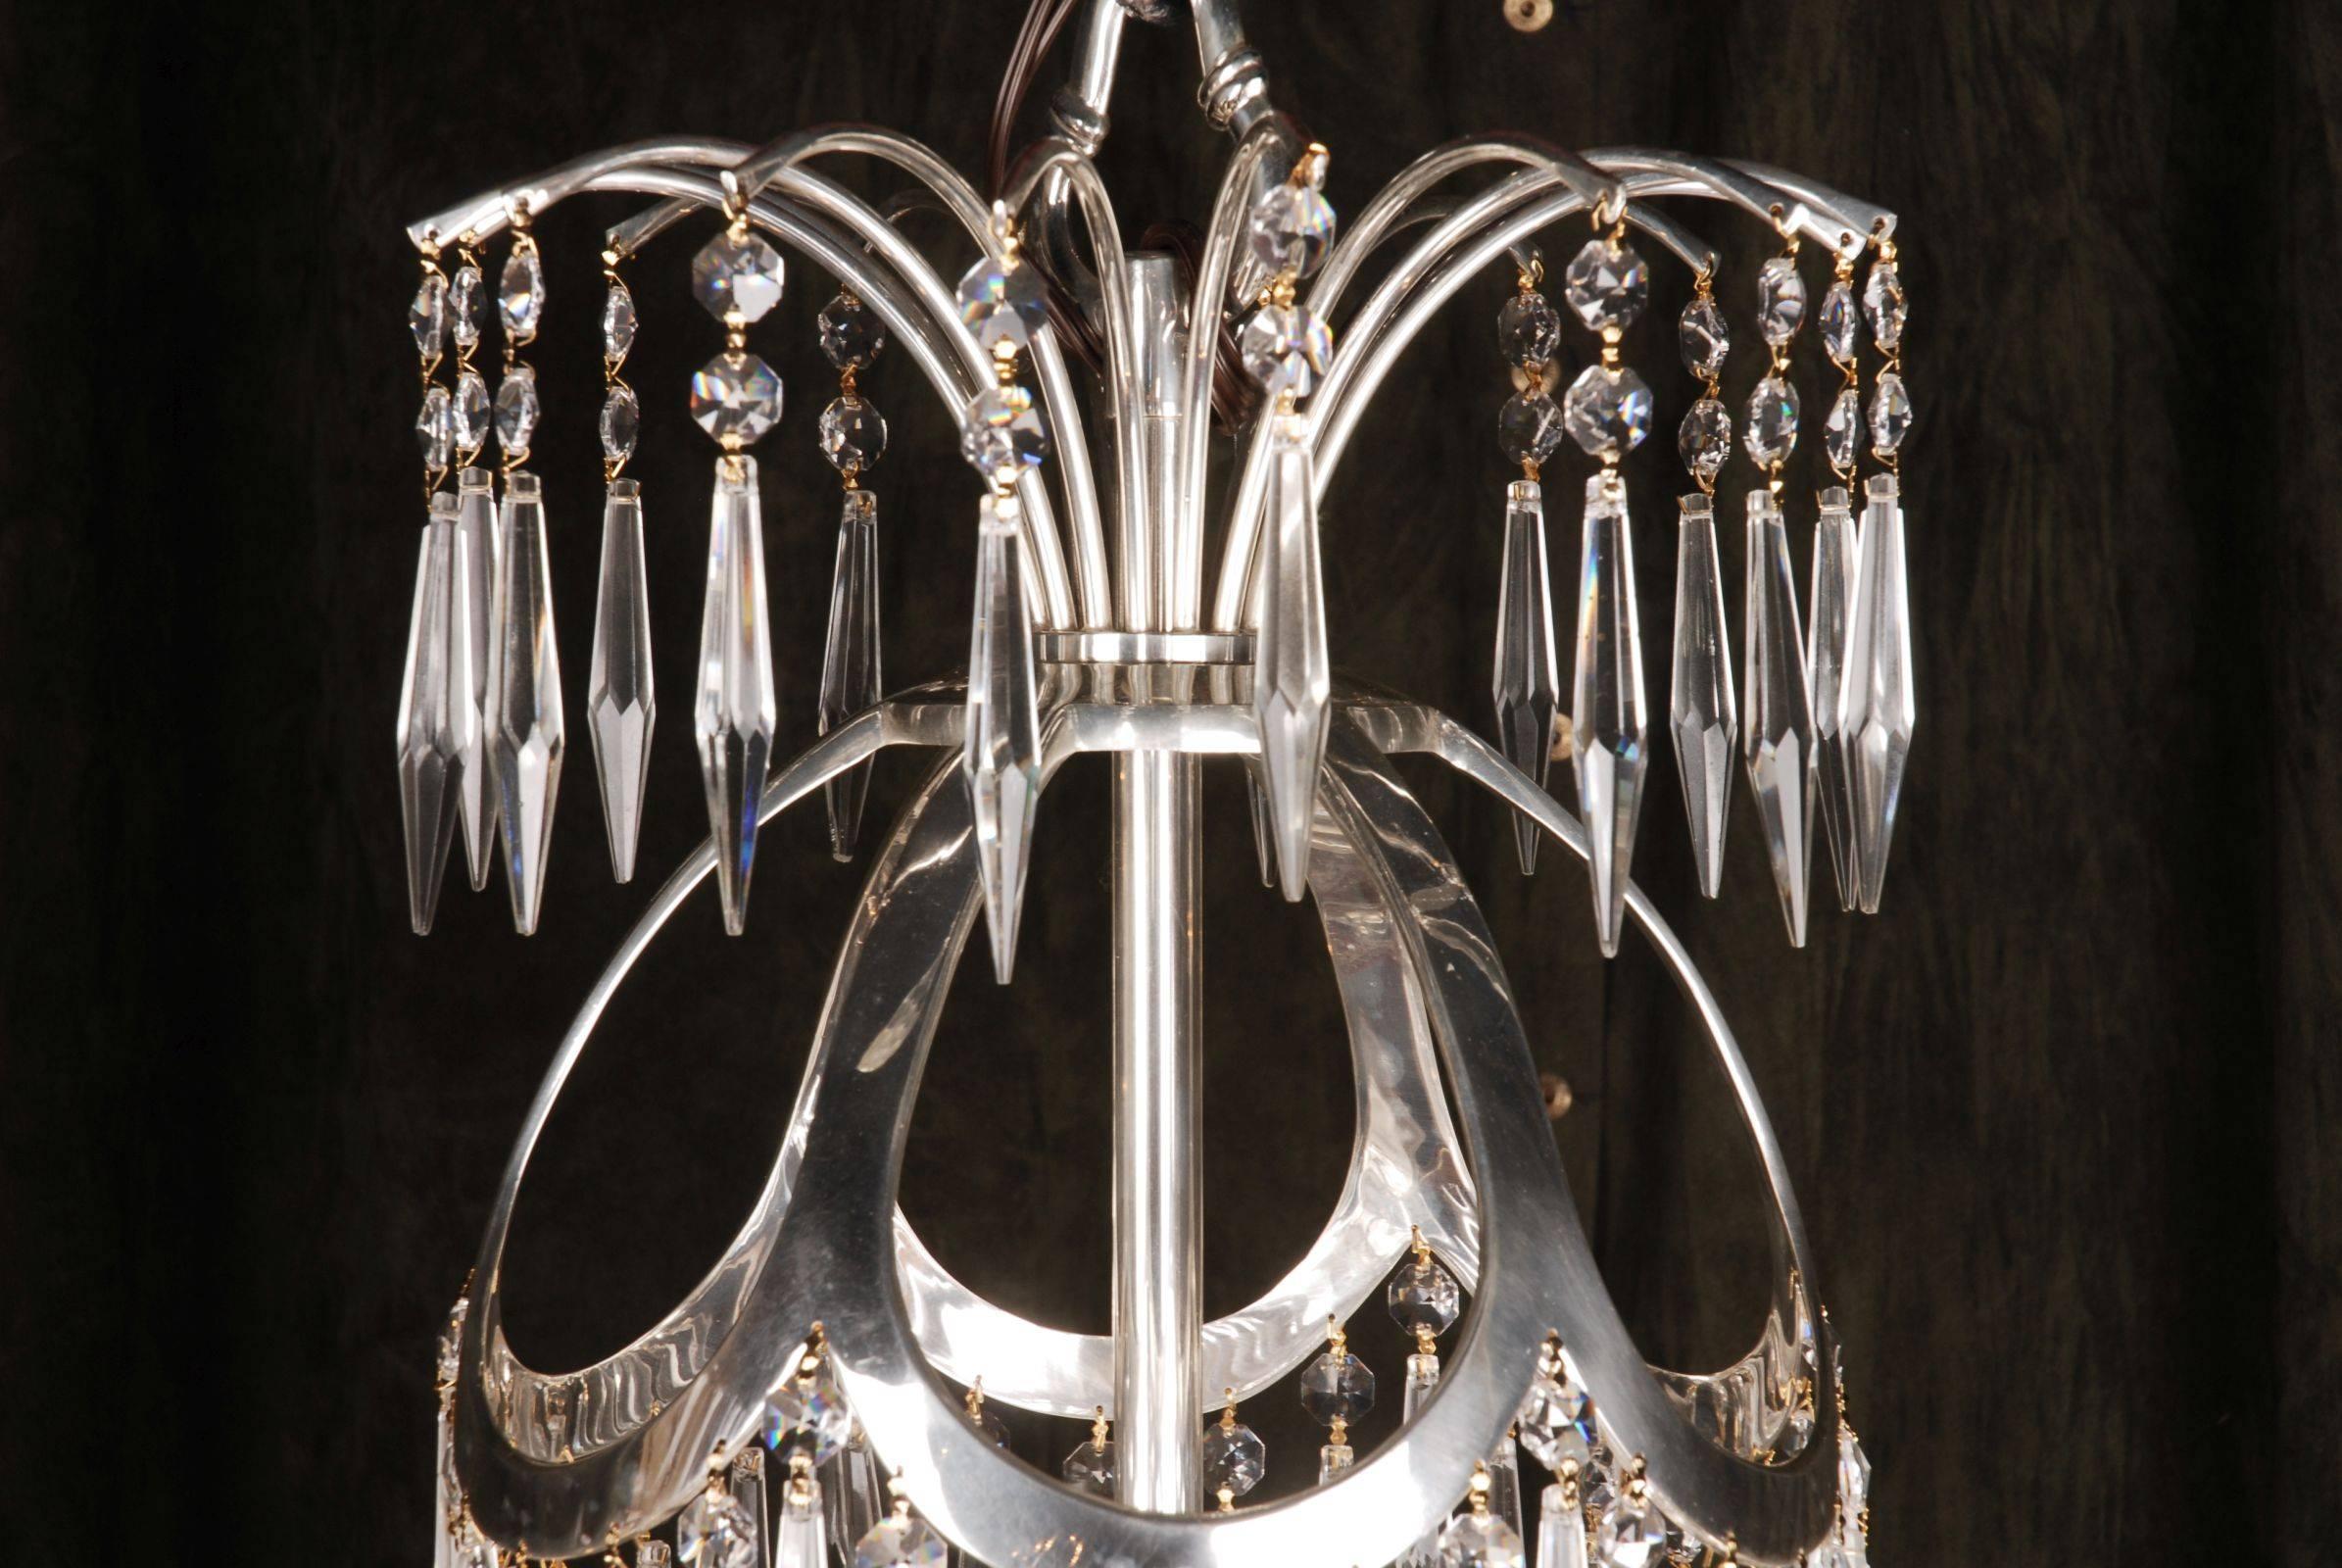 20th Century Classicist Style Swedish Empire Ceiling Candelabra Chandelier For Sale 3